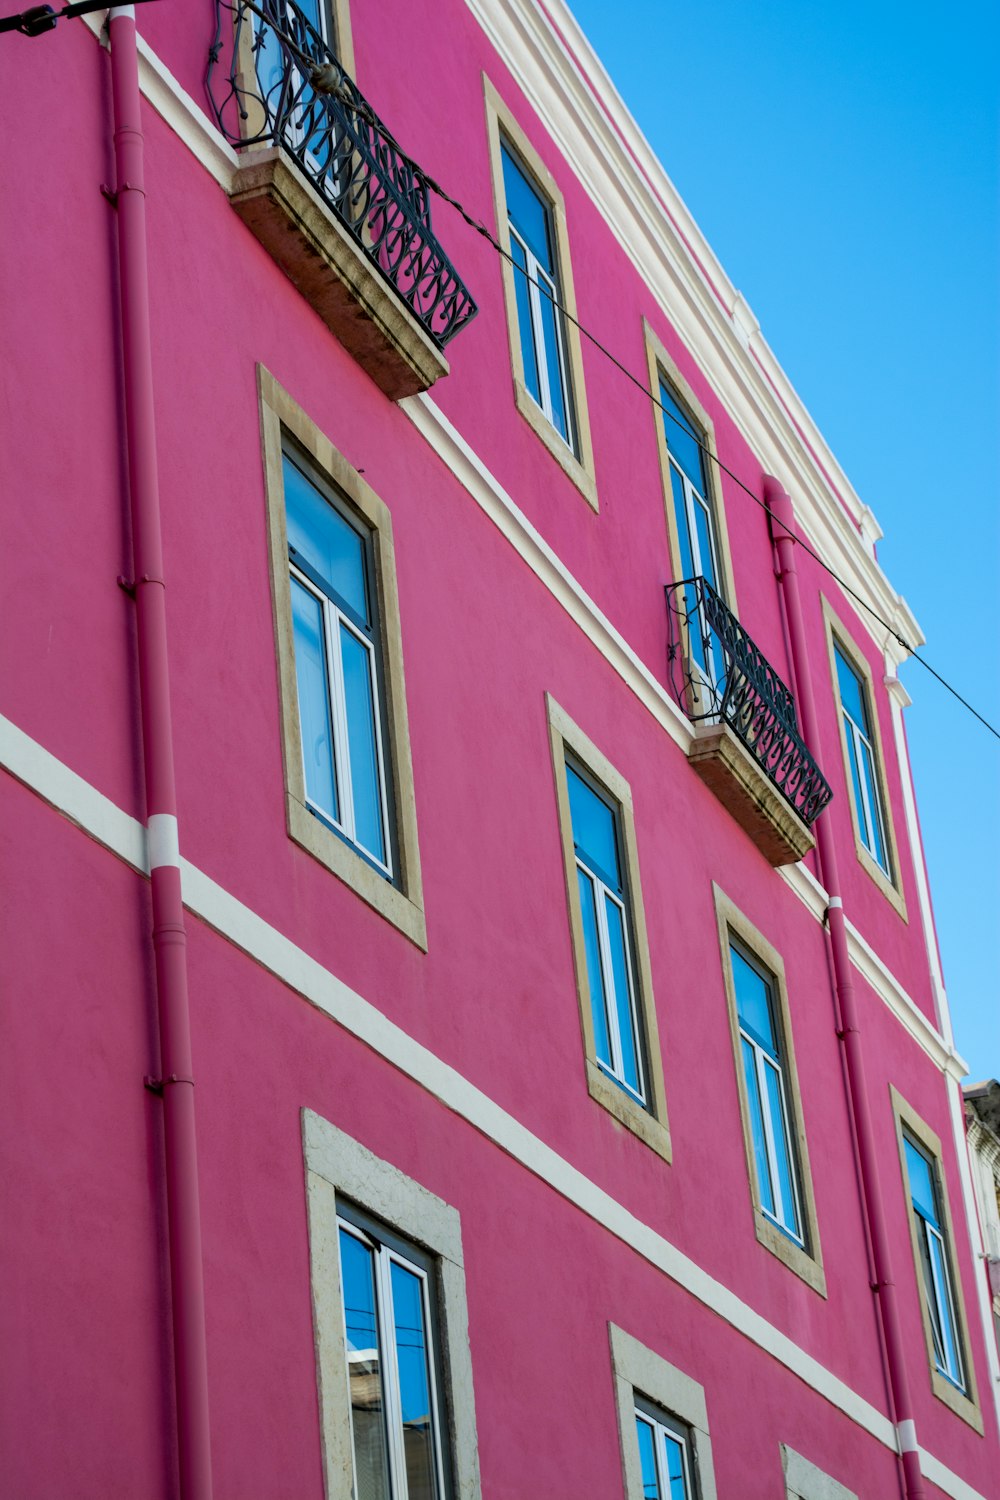 a pink building with balconies and balconies on the balconies